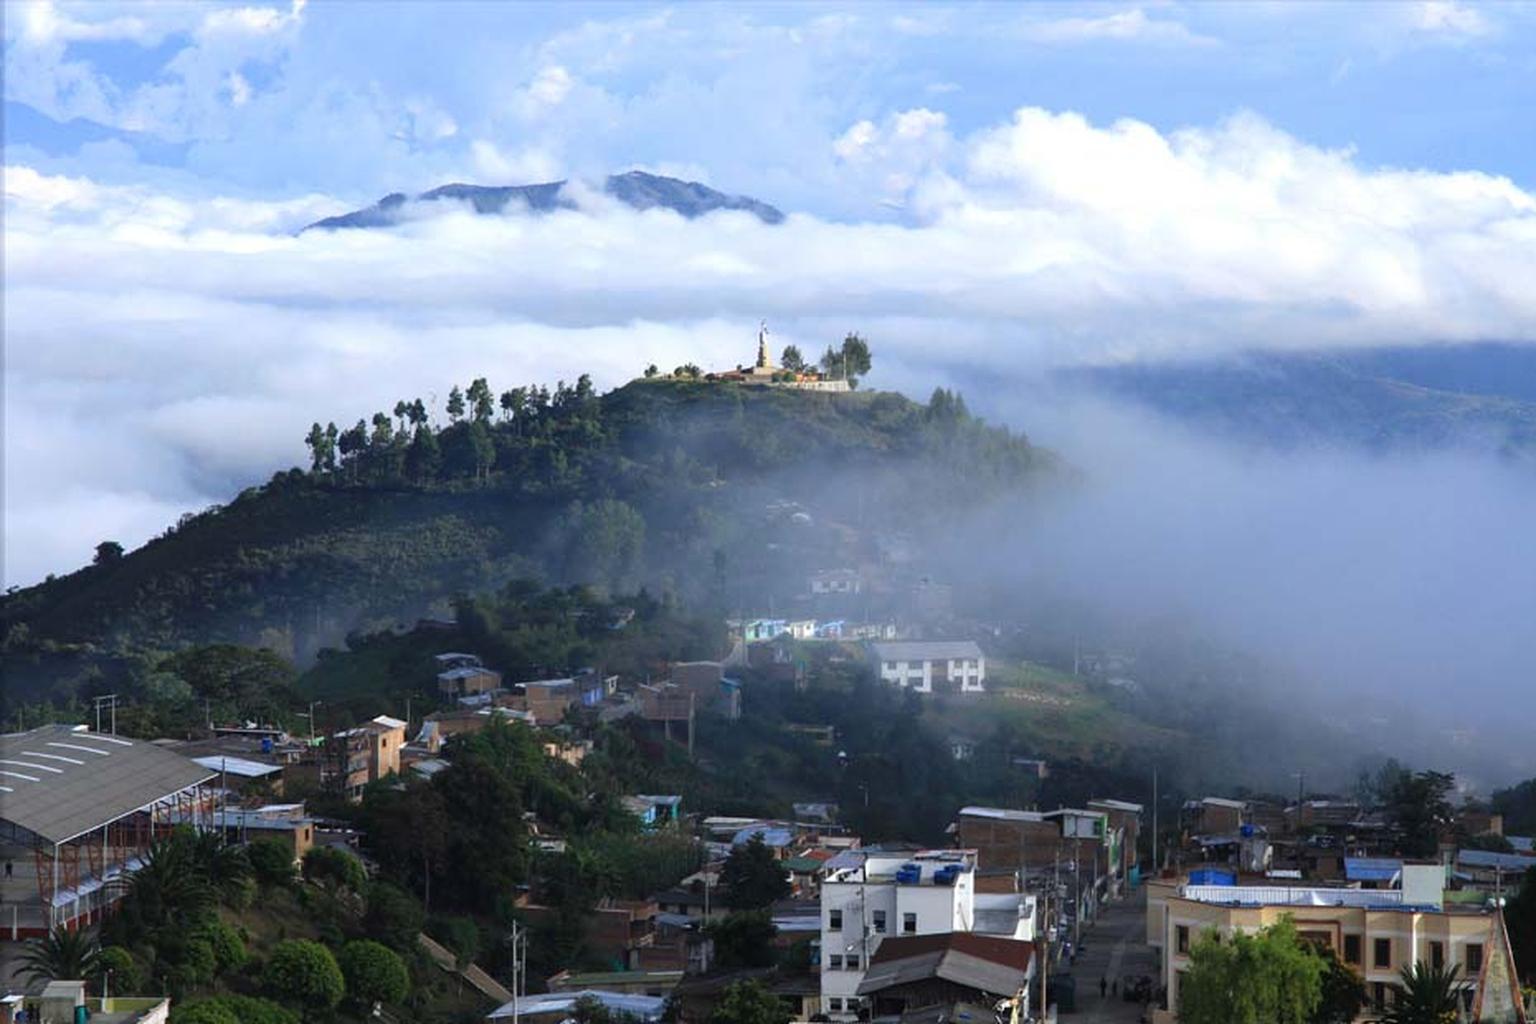 The landscape of Narino, Colombia - the region from which the gold used in Chopard's Green Carpet Collection is mined